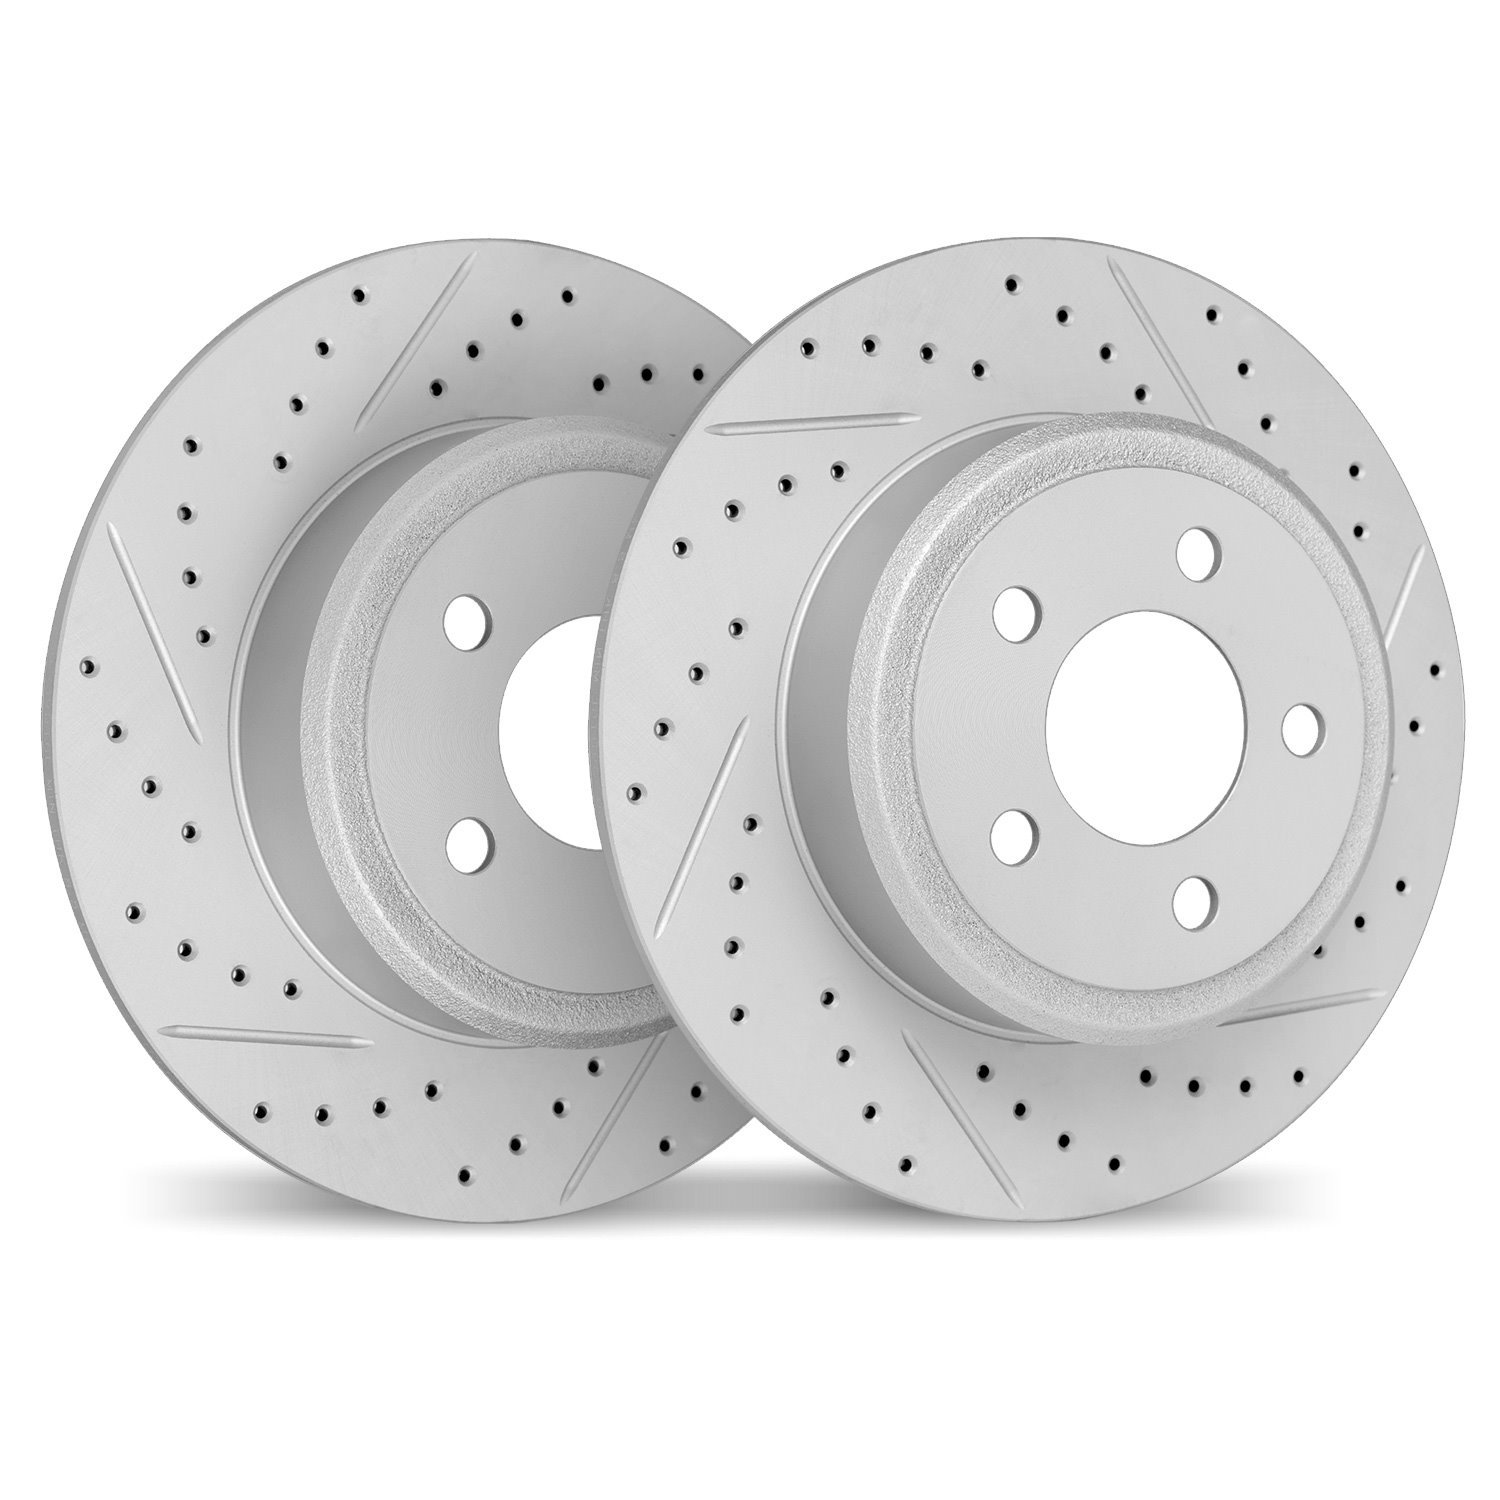 2002-58067 Geoperformance Drilled/Slotted Brake Rotors, Fits Select Acura/Honda, Position: Rear